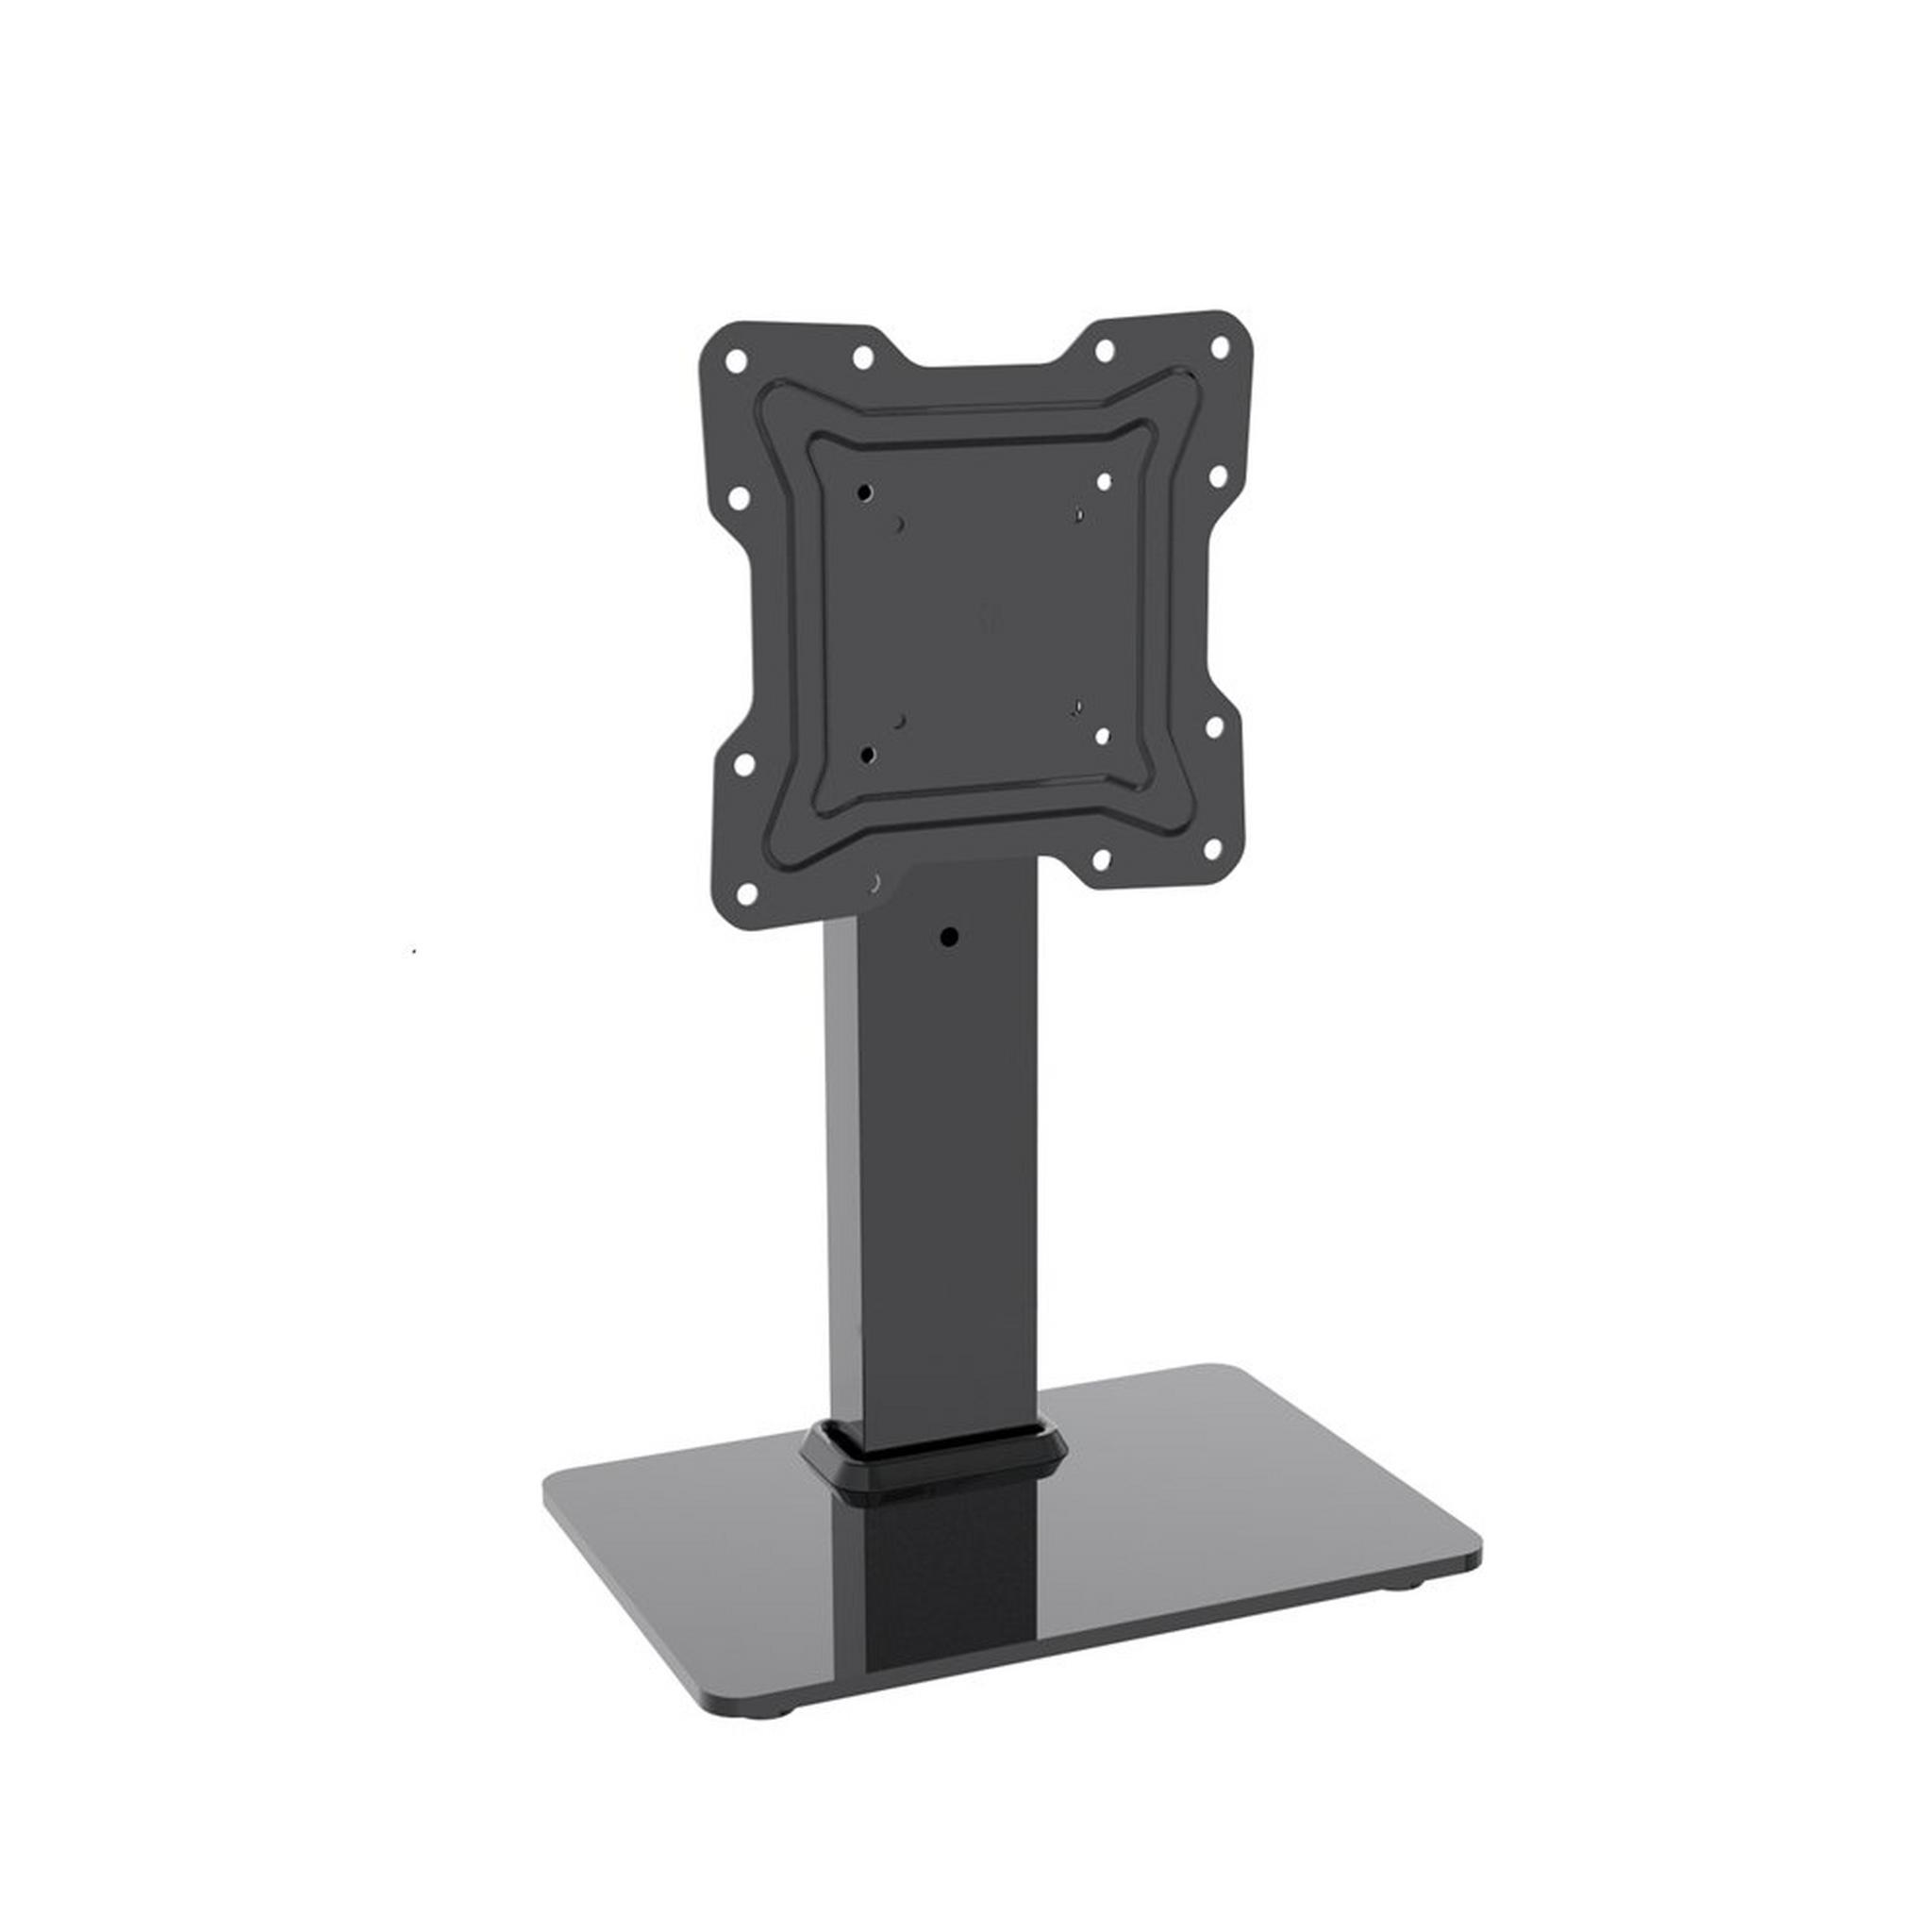 Wansa Glass Basement TV Stand, Fits 17 - 43 inches, 30kg Loading Capacity, STS02-22 - Black